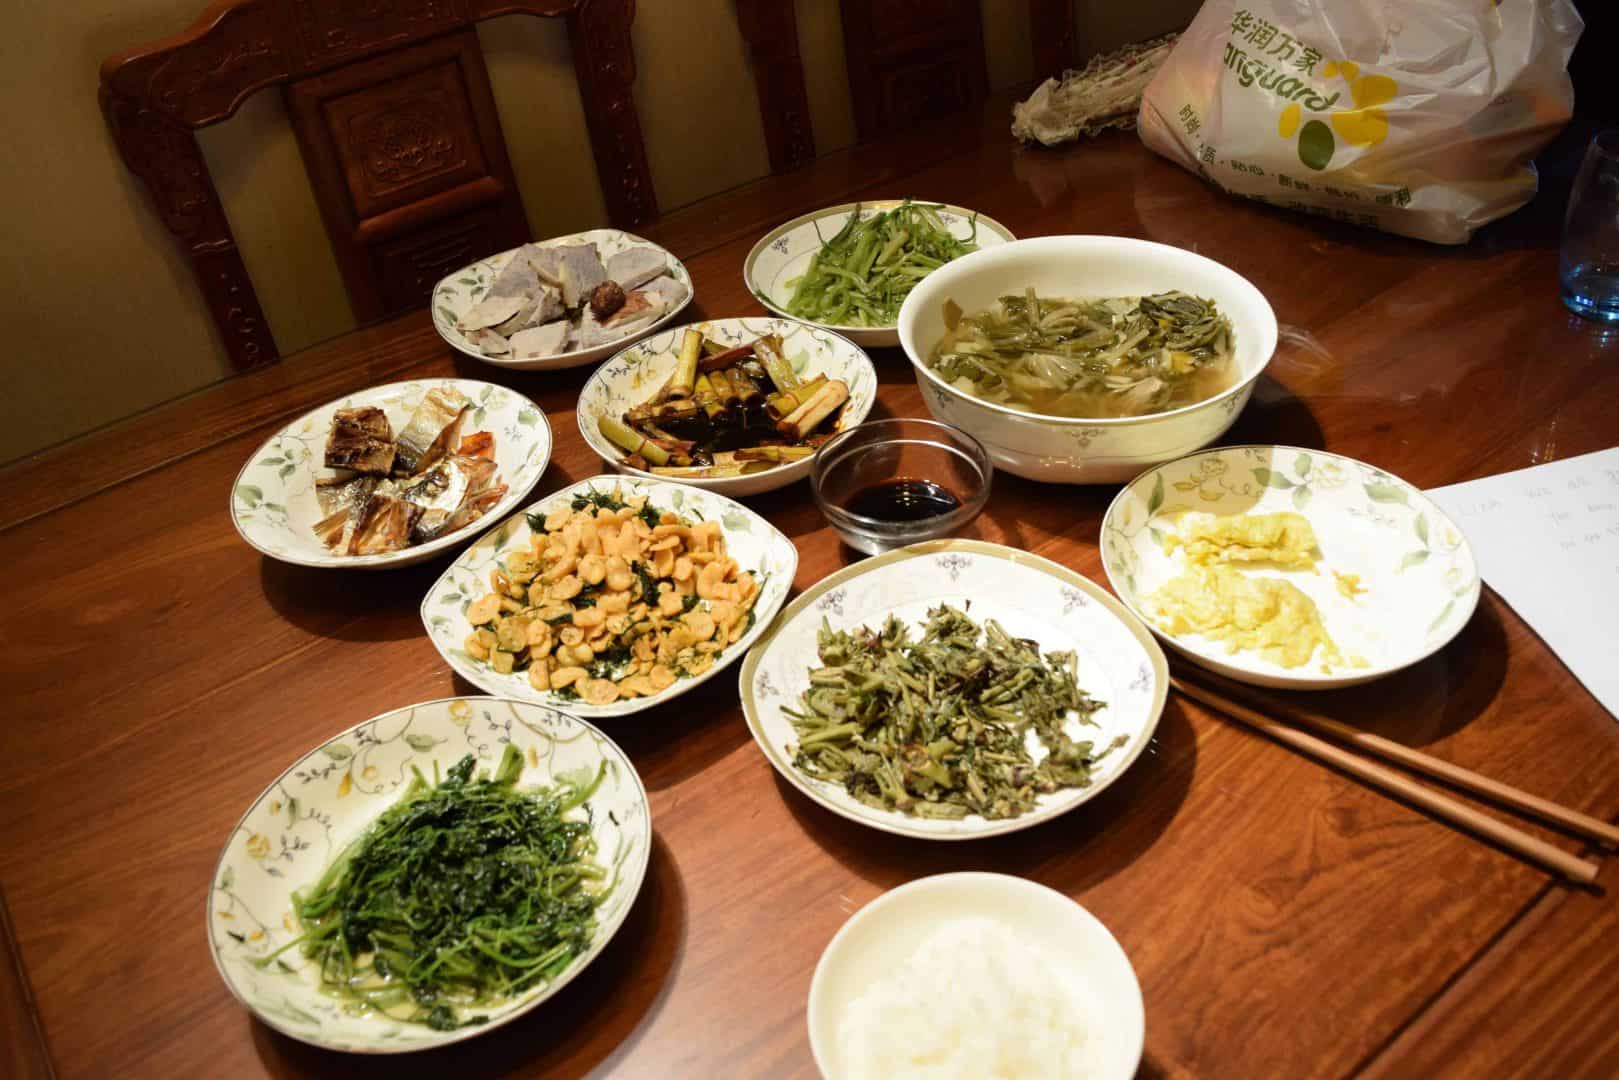 Travelling as a vegetarian in China